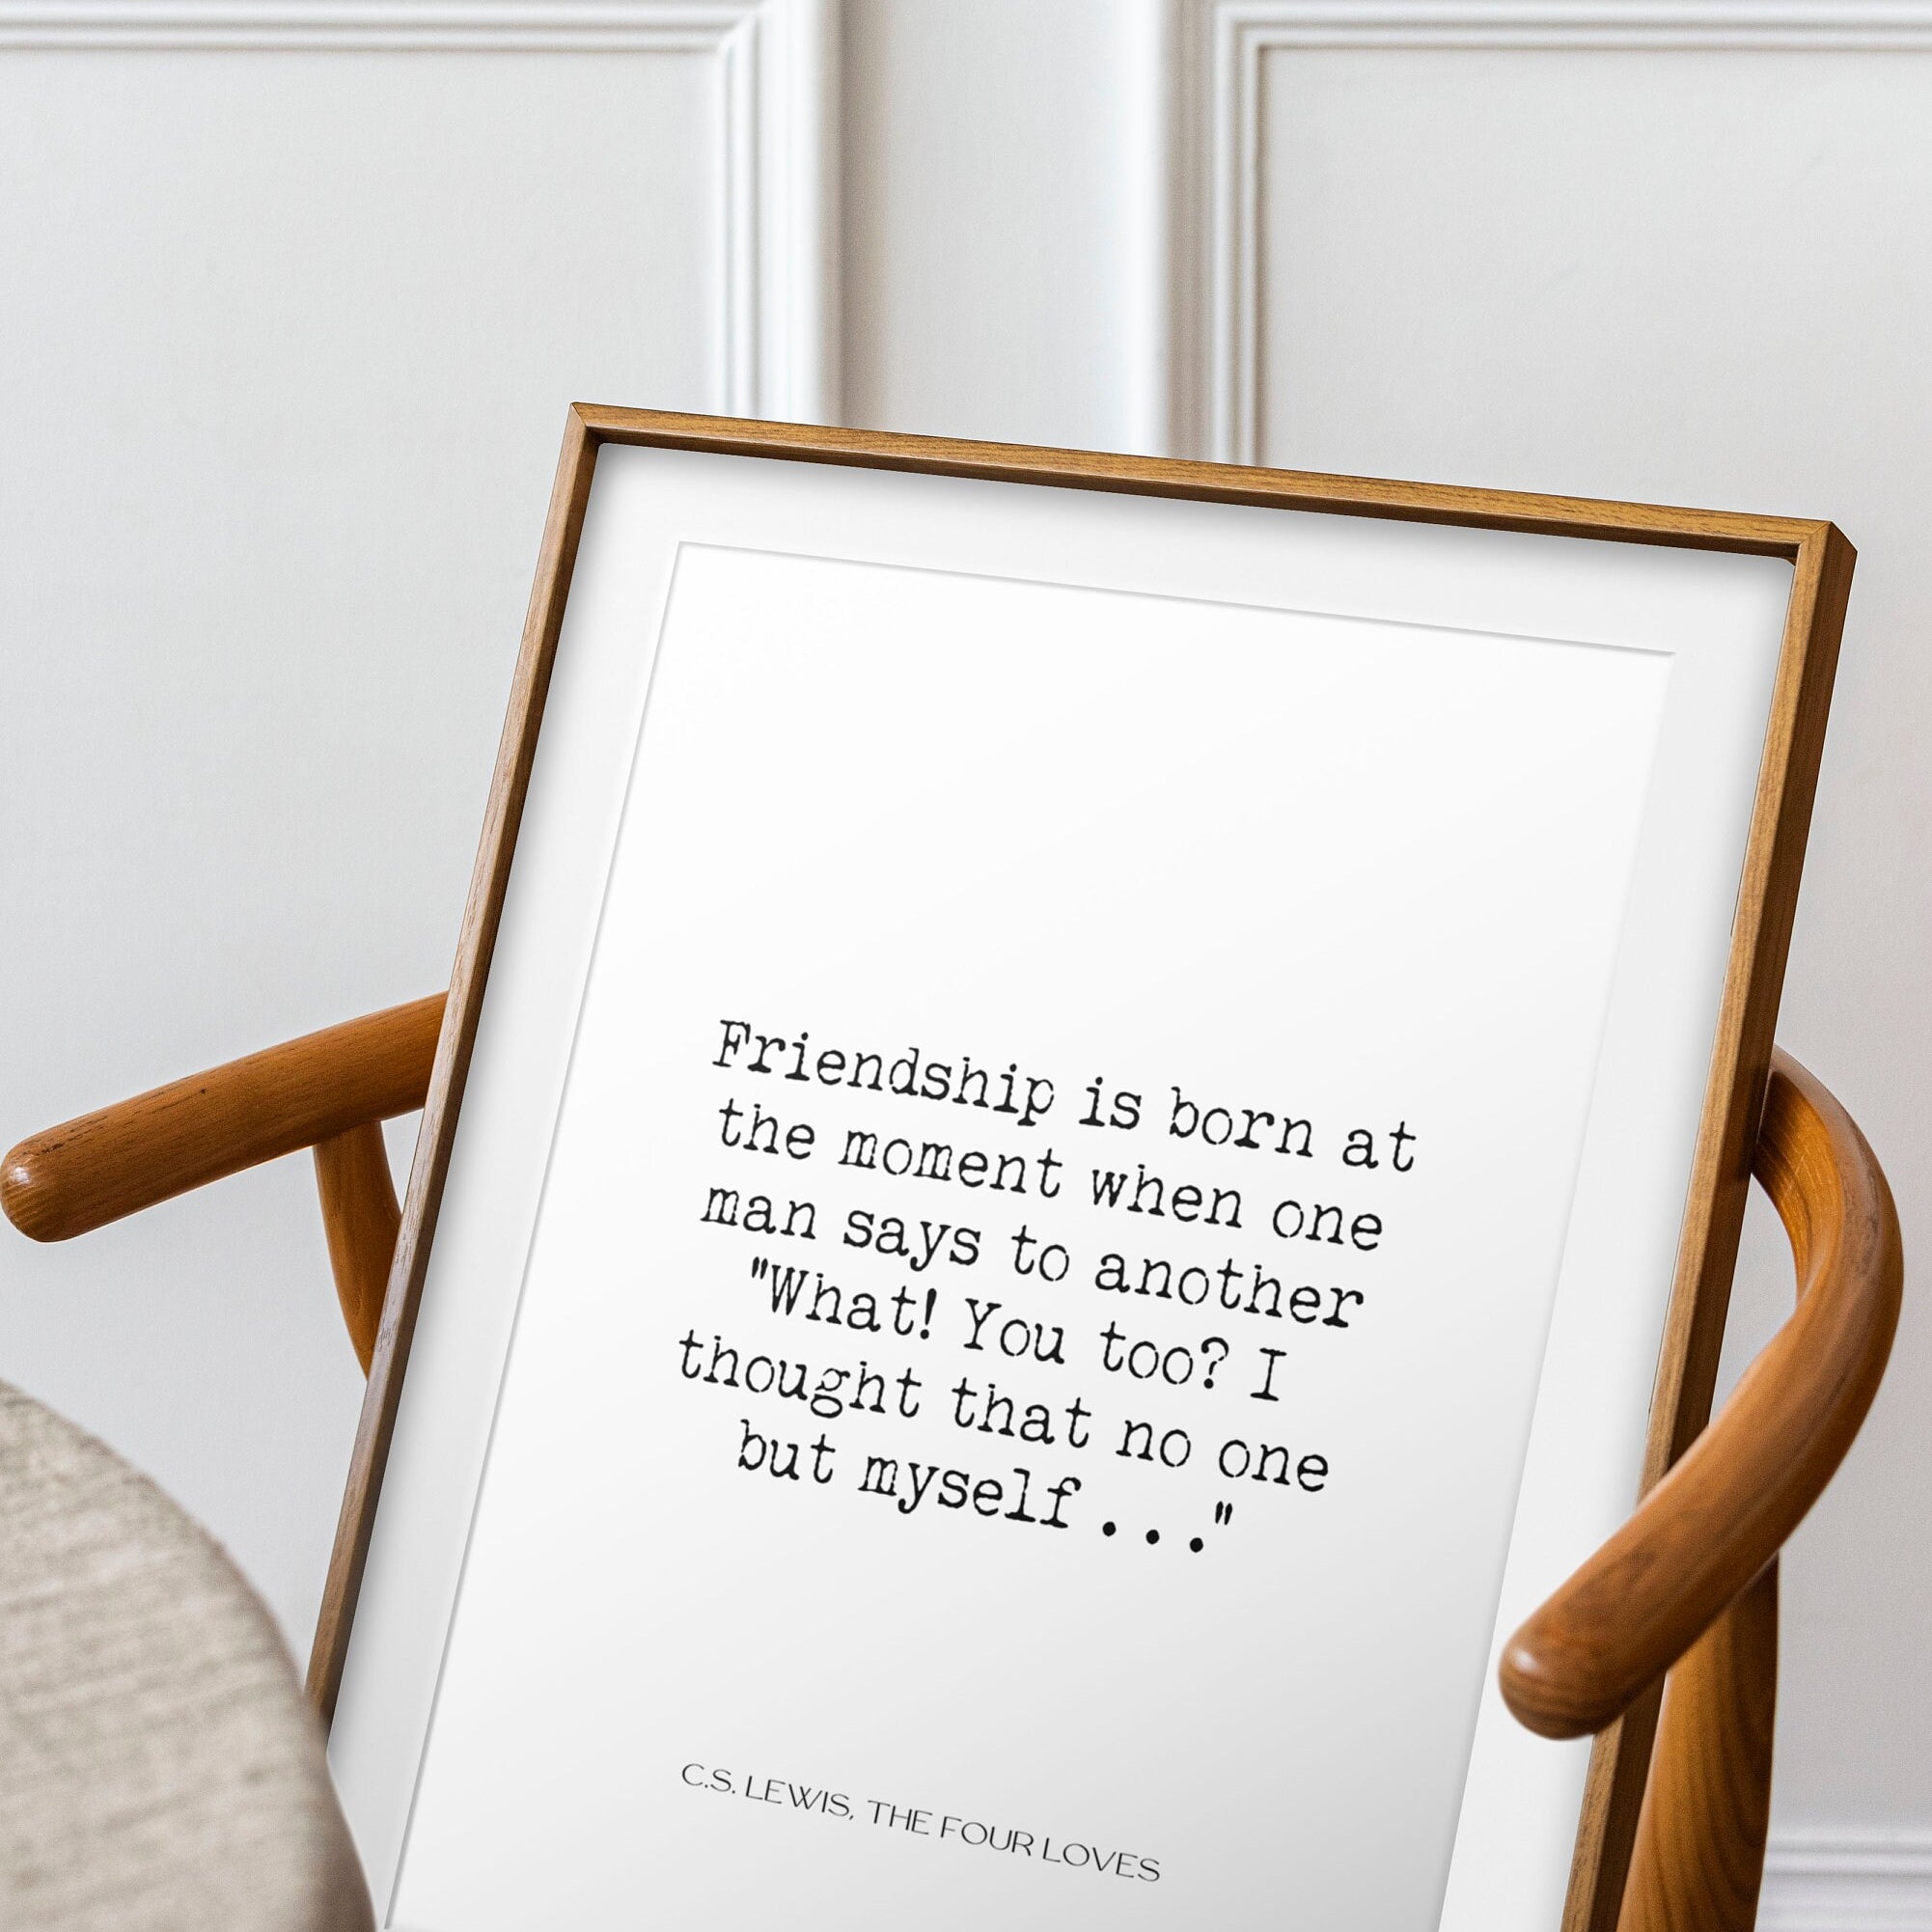 Friendship is Born Inspirational C.S. Lewis Literary Quote Print, Unframed and Framed Art Bedroom Decor, Minimalist Wall Art